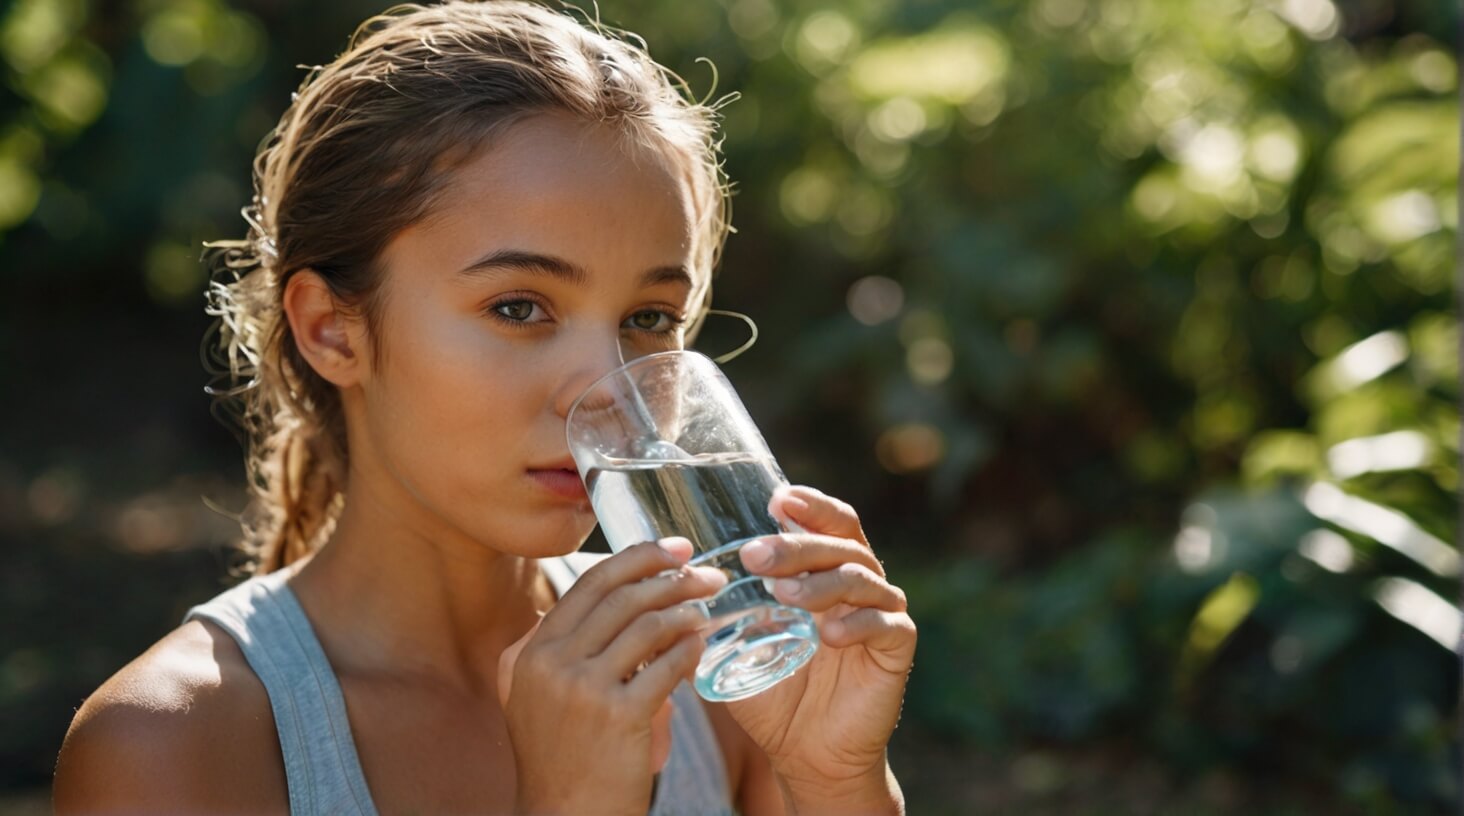 Image of a person drinking water with a focus on promoting hydration for immune support